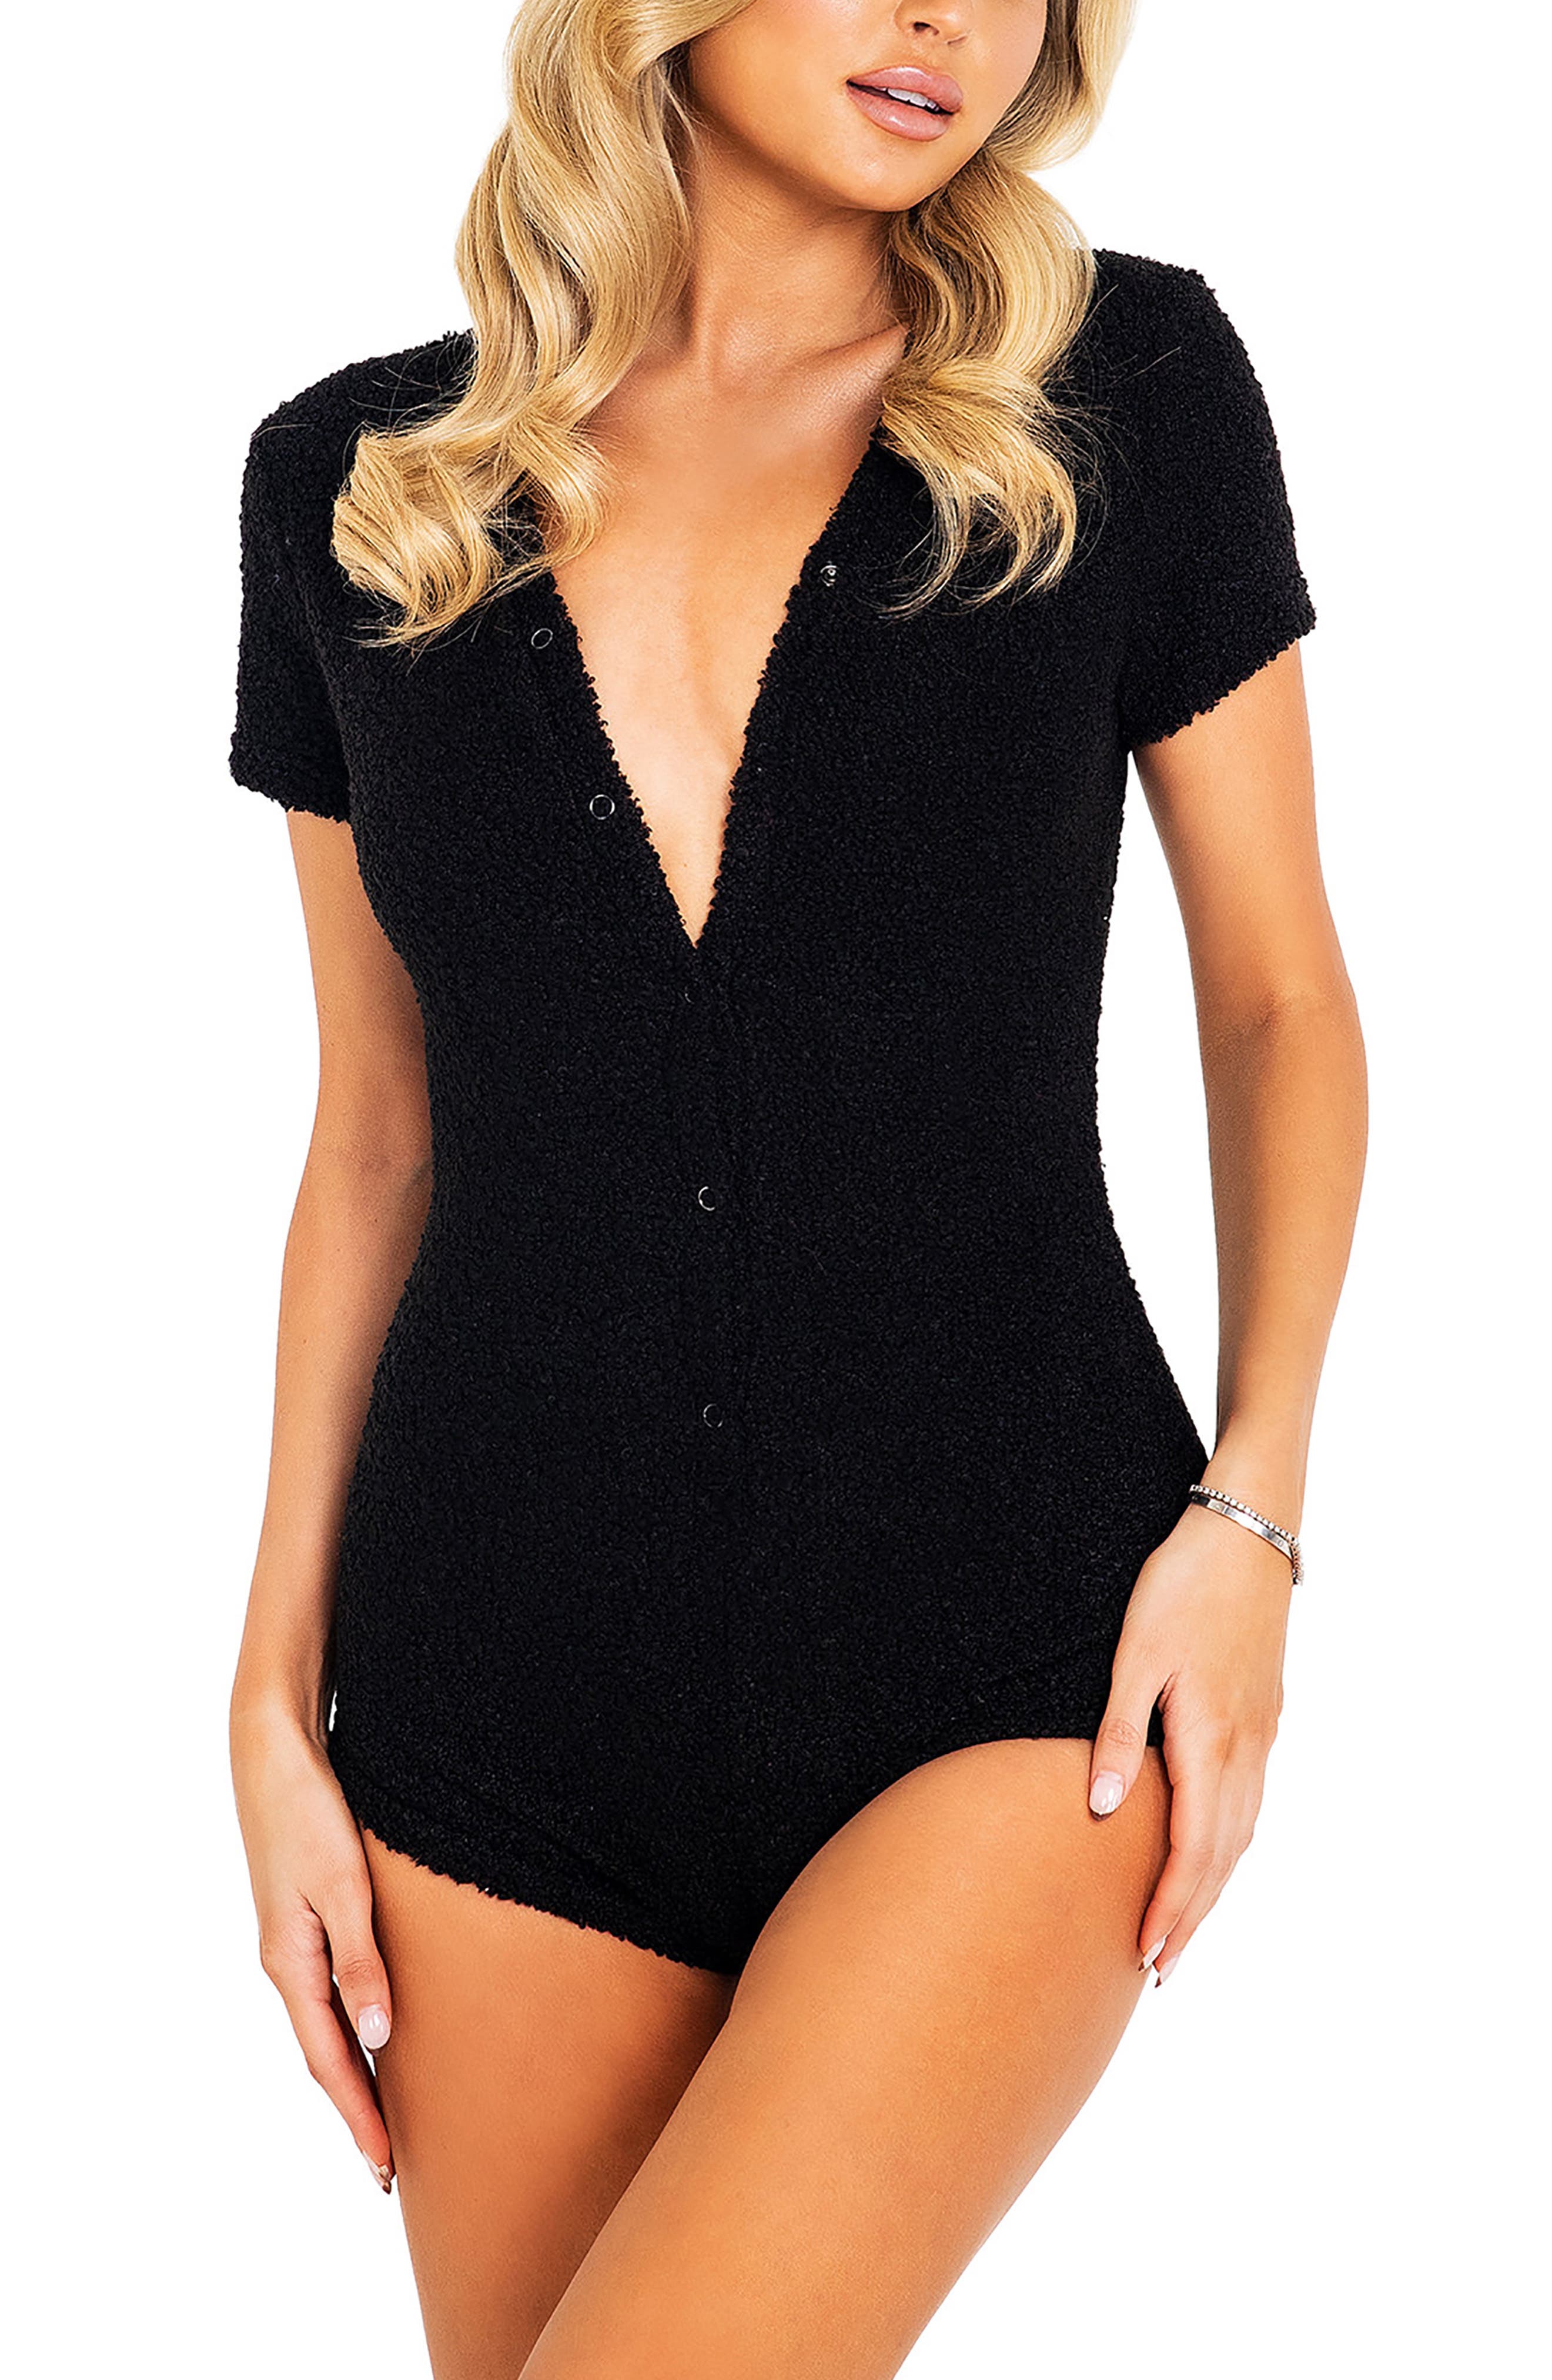 clothing sleepwear Only One Available Lingerie Kate/'s Lounging Olive Romper bridal accessories Adorable Designer Sleep Romper